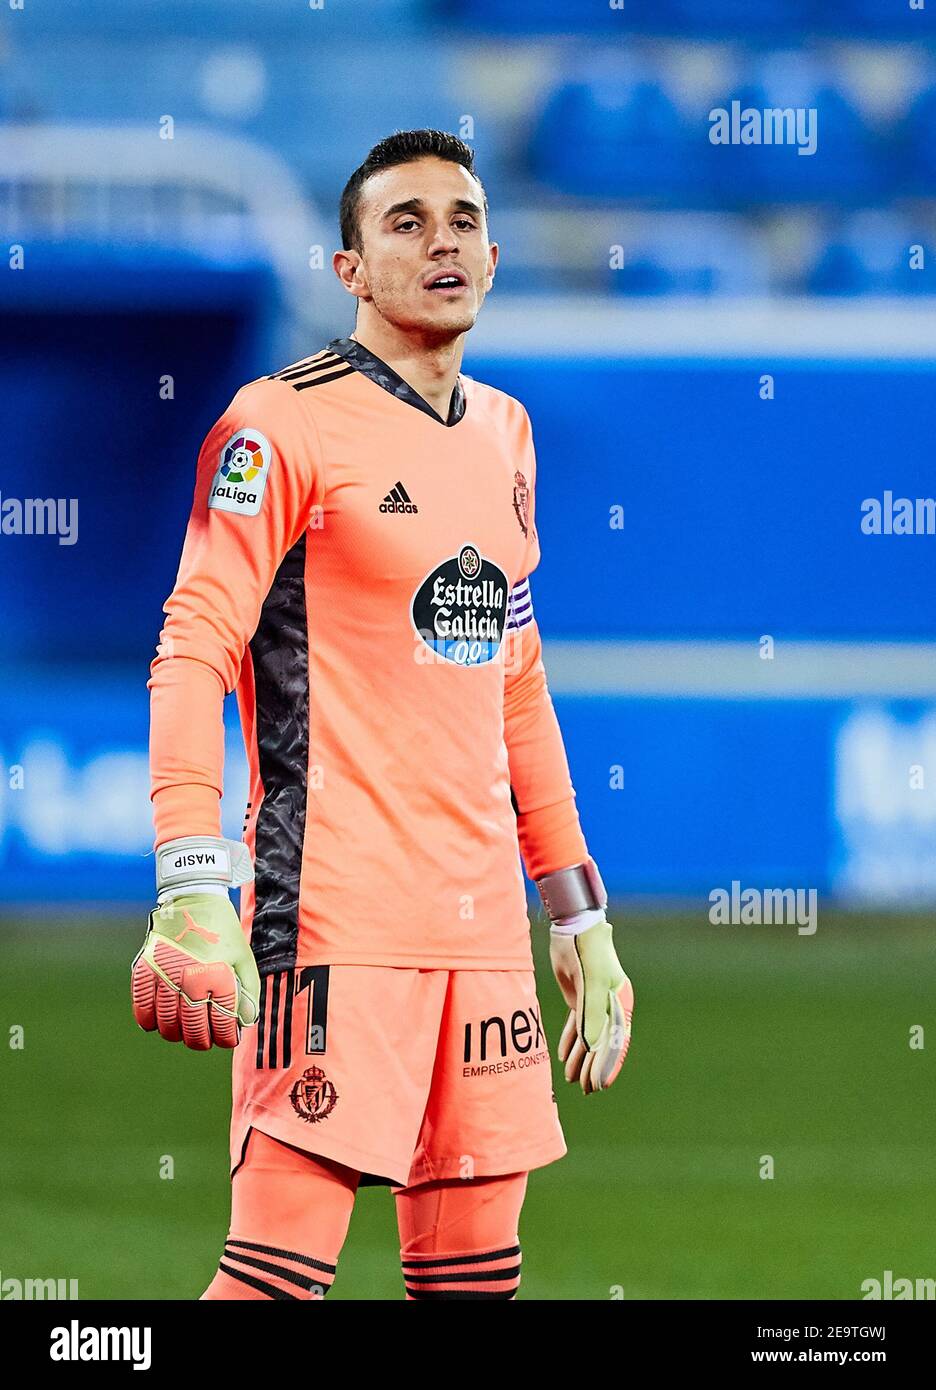 Jordi Masip of Real Valladolid during the Spanish championship La Liga  football match between Deportivo Alaves and Real Vallad / LM Stock Photo -  Alamy